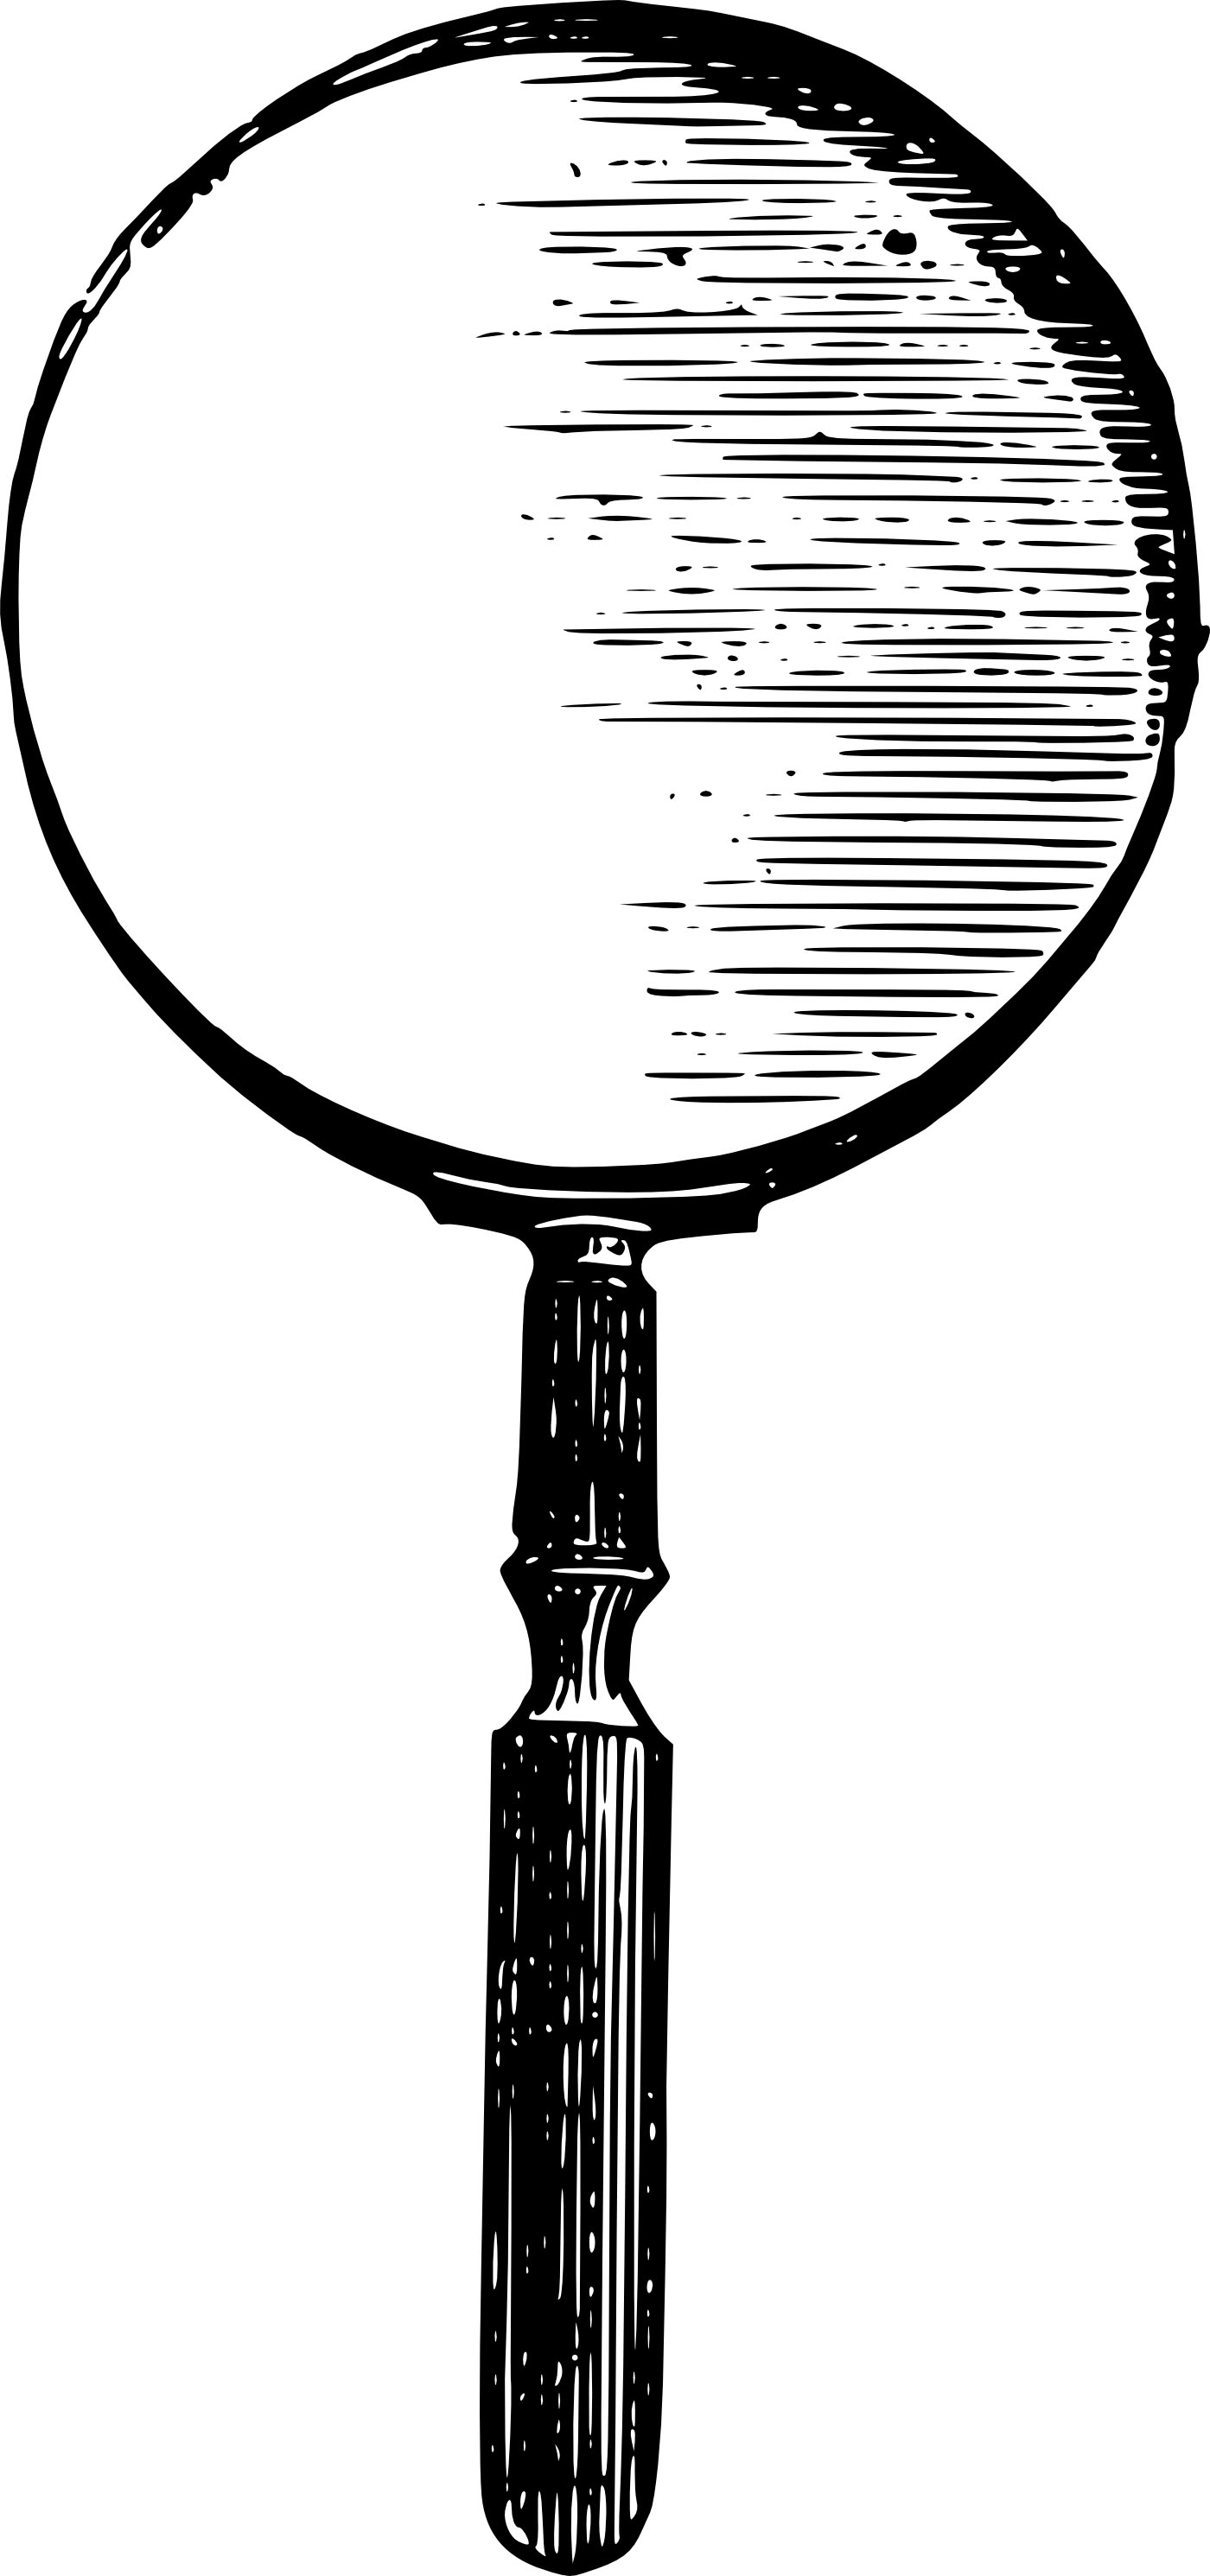 Royalty Free Image - Vintage Magnifying Glass Vector Clip Art | Oh ...